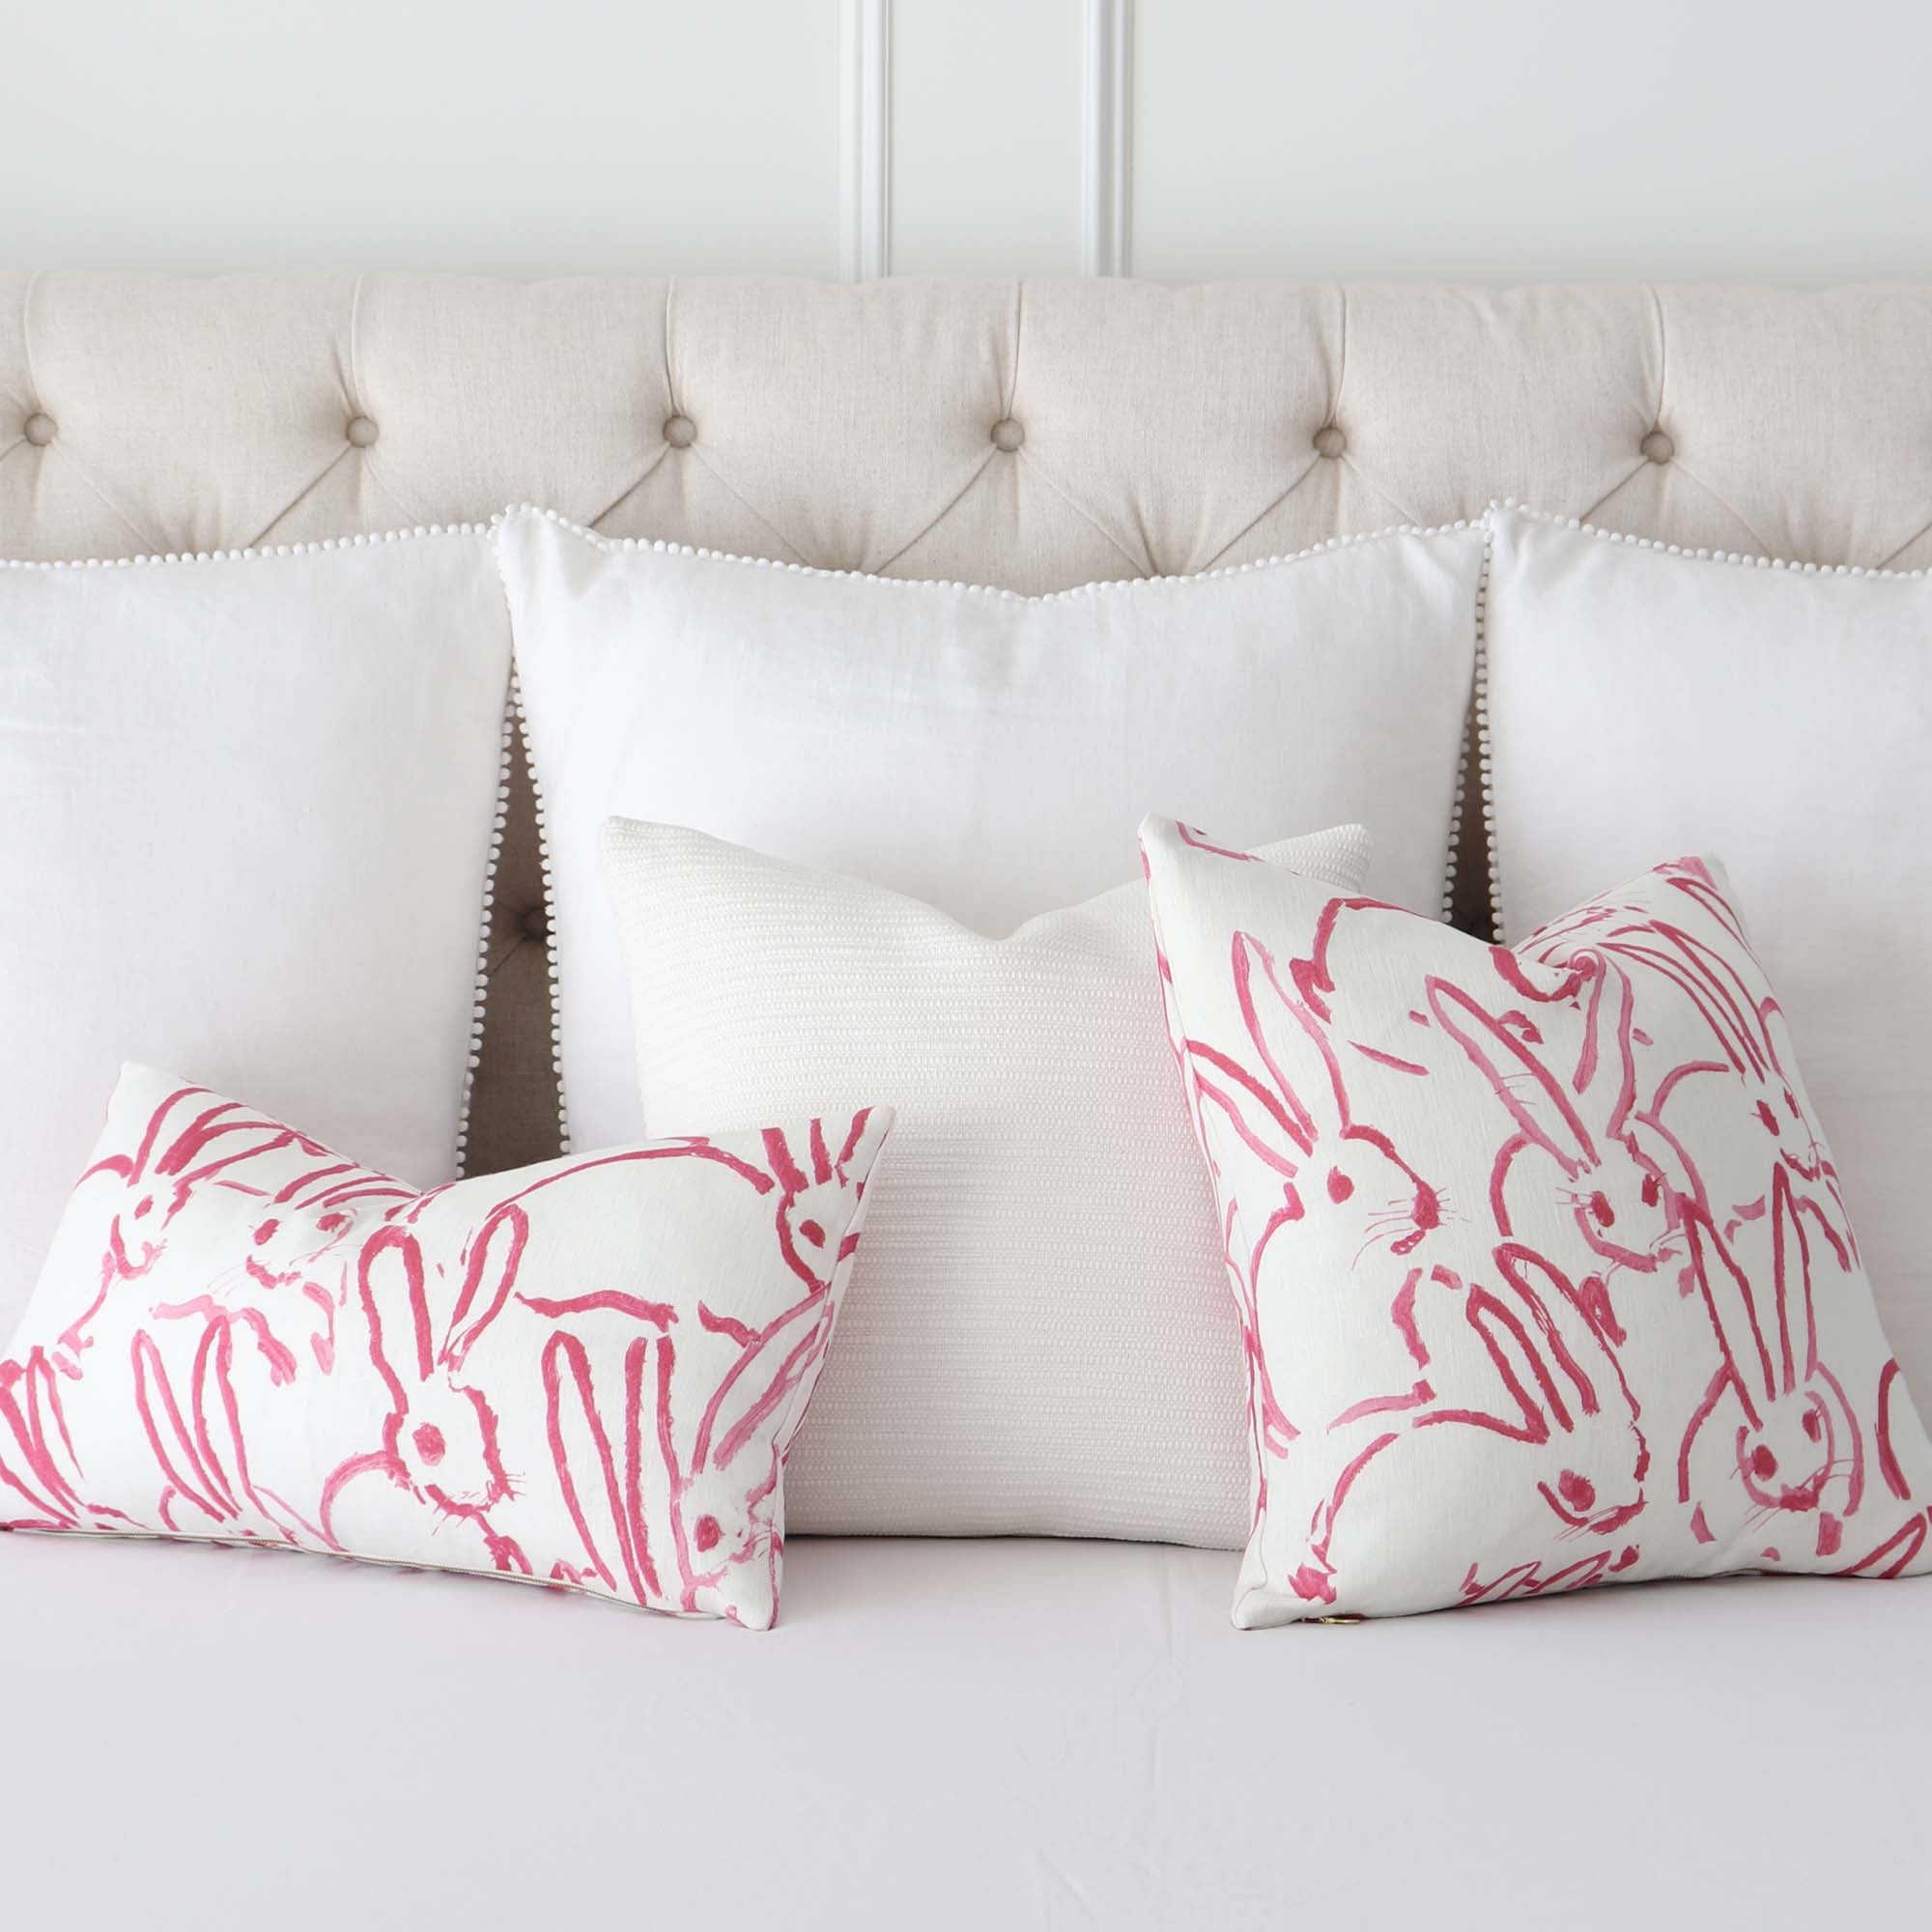 Lee Jofa Groundworks Hutch Pink Bunny Designer Throw Pillow Cover with Matching Pillows